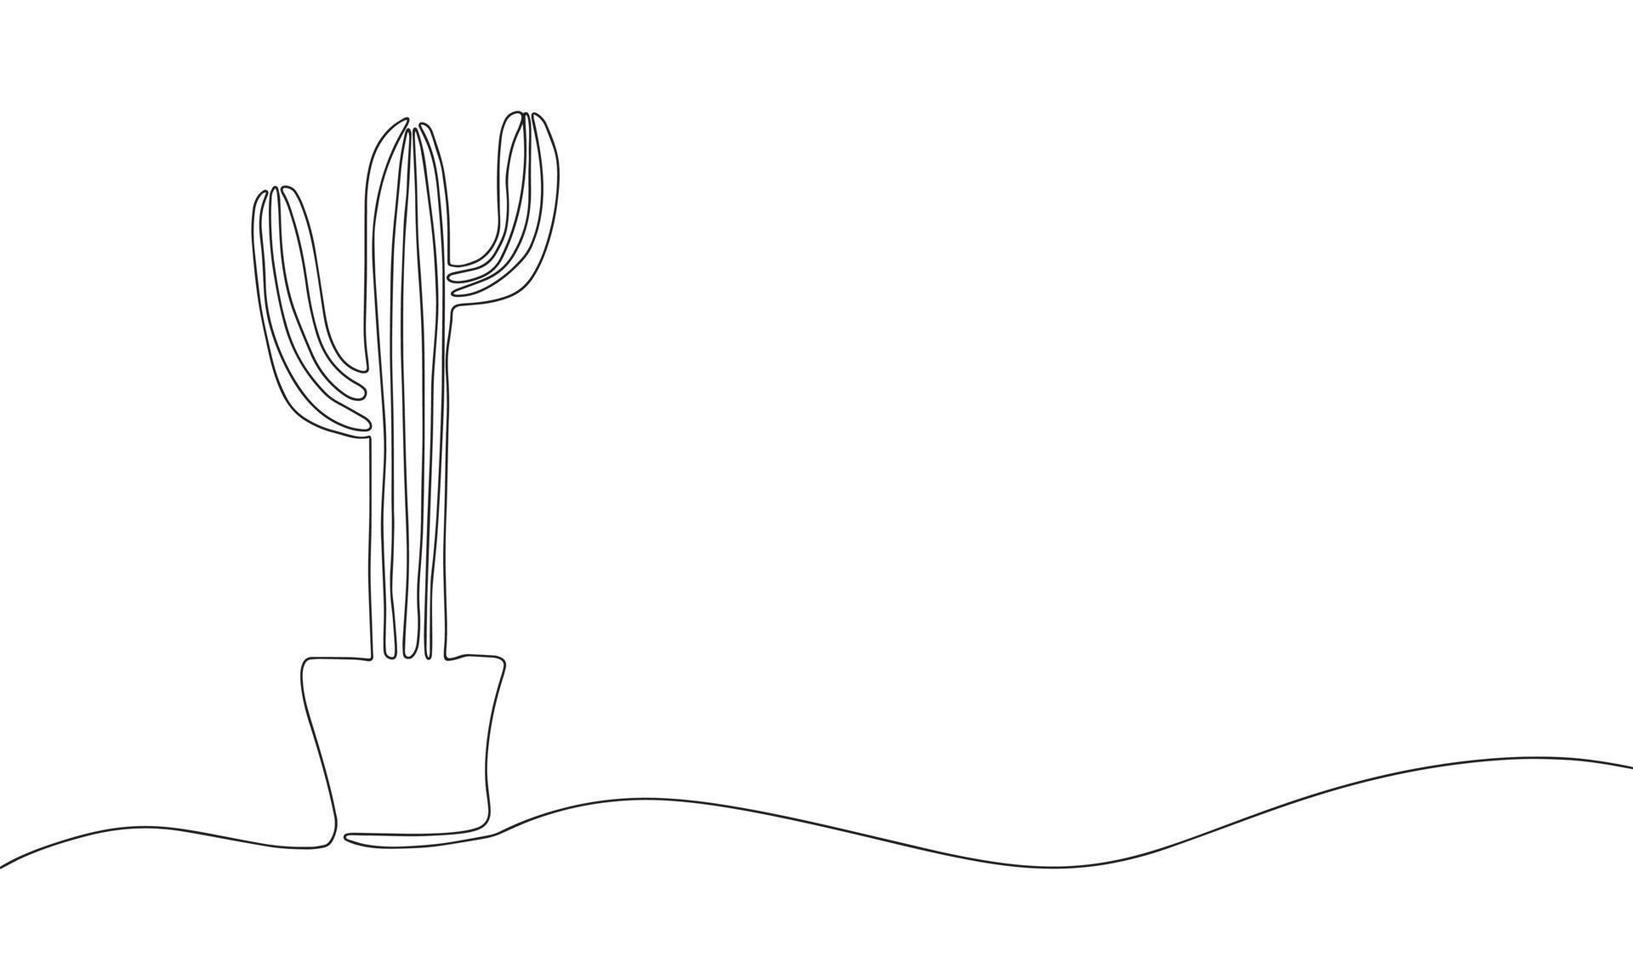 Cactus. One line home plants silhouette. Botanical Continuous line background. Contour illustration isolated on white. Minimalist art vector drawing. Modern decor.